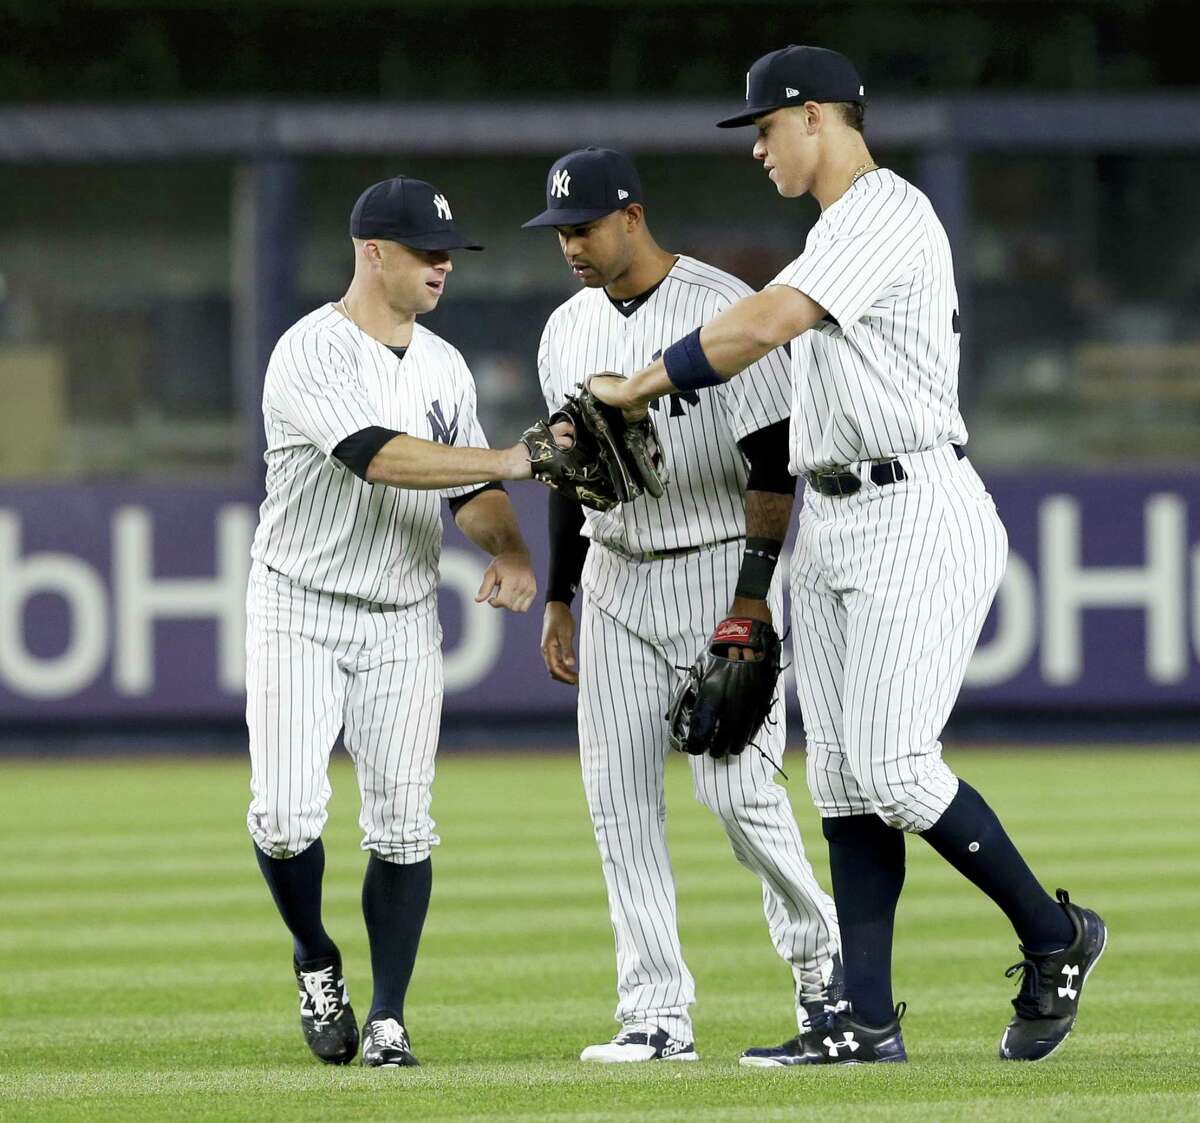 New York Yankees’ Brett Gardner, left, Jacoby Ellsbury, center, and Aaron Judge celebrate in the outfield after the baseball game against the Chicago White Sox at Yankee Stadium, Wednesday, April 19, 2017, in New York. The Yankees defeated the White Sox 9-1. (AP Photo/Seth Wenig)